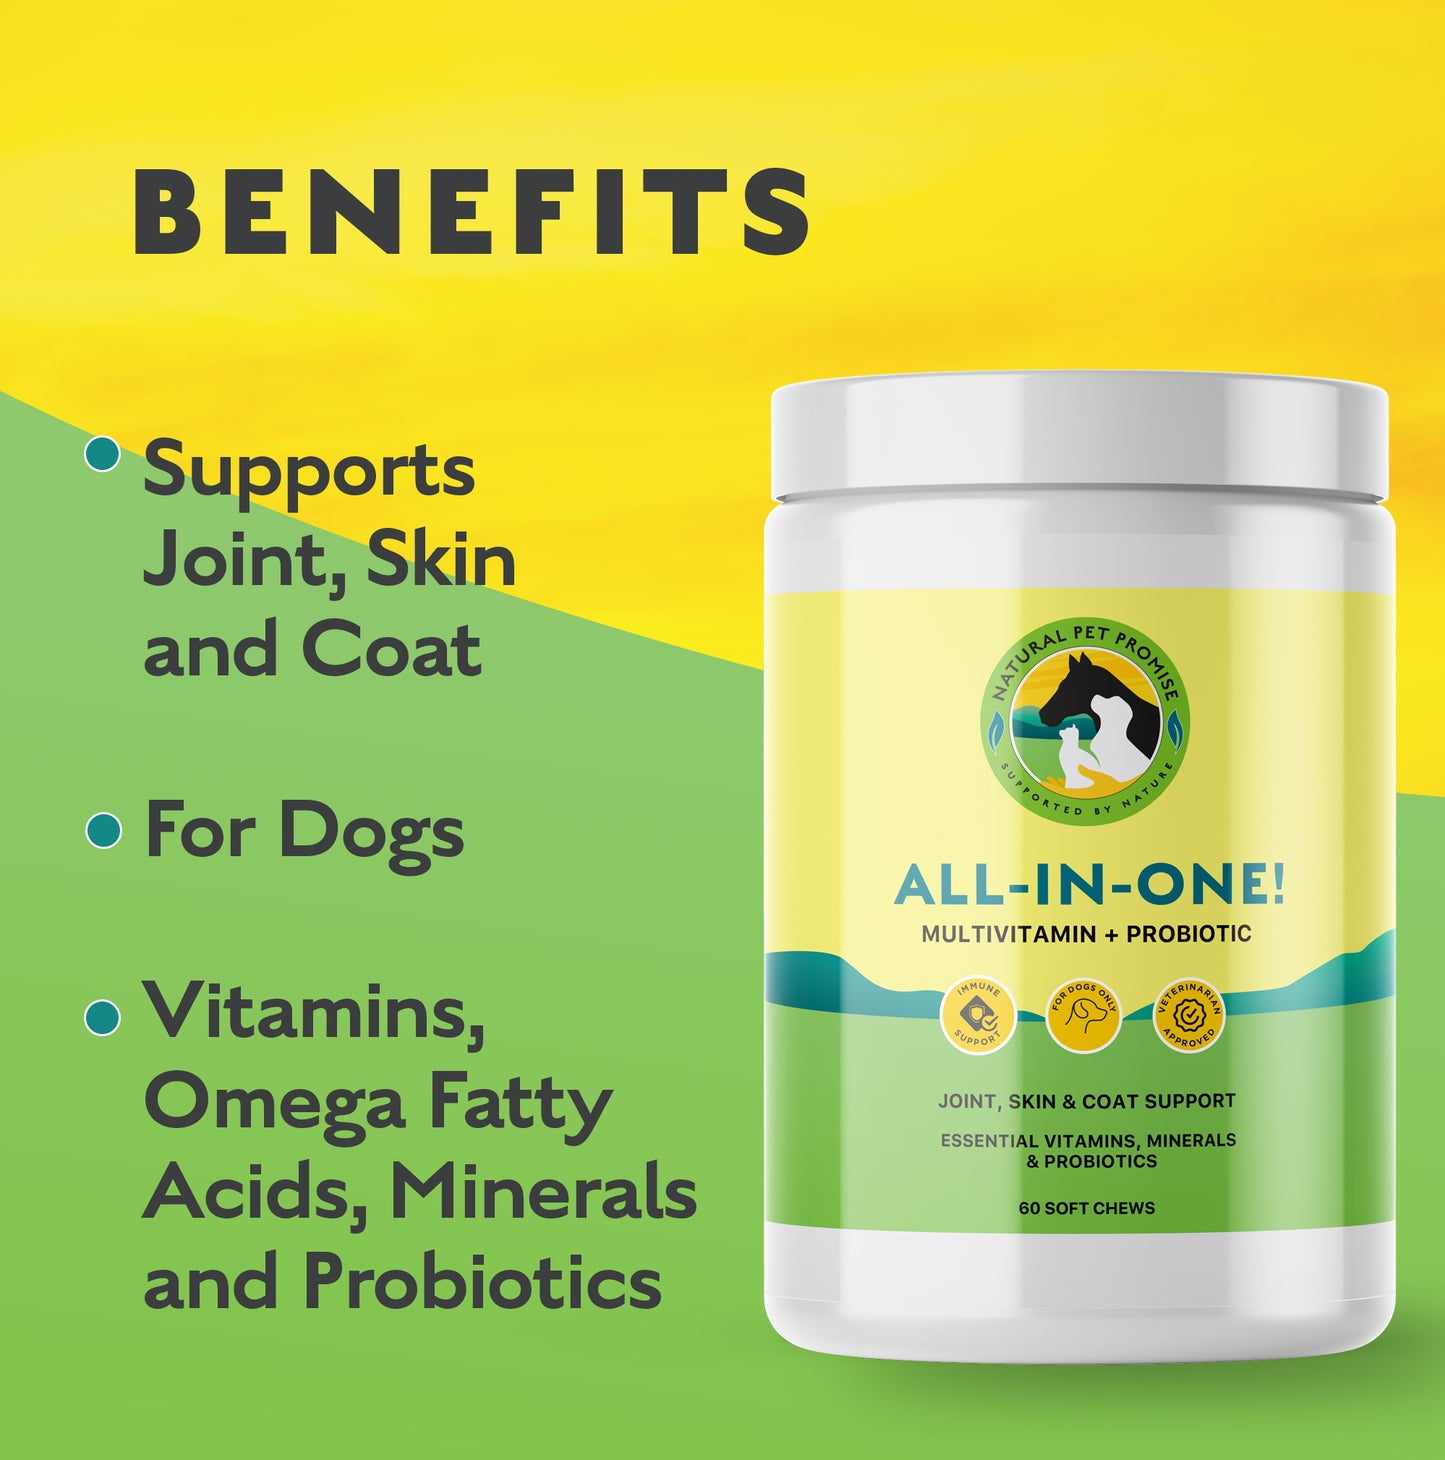 JOINT SUPPORT/VITAMIN- All-In-One! Multivitamin and Probiotic